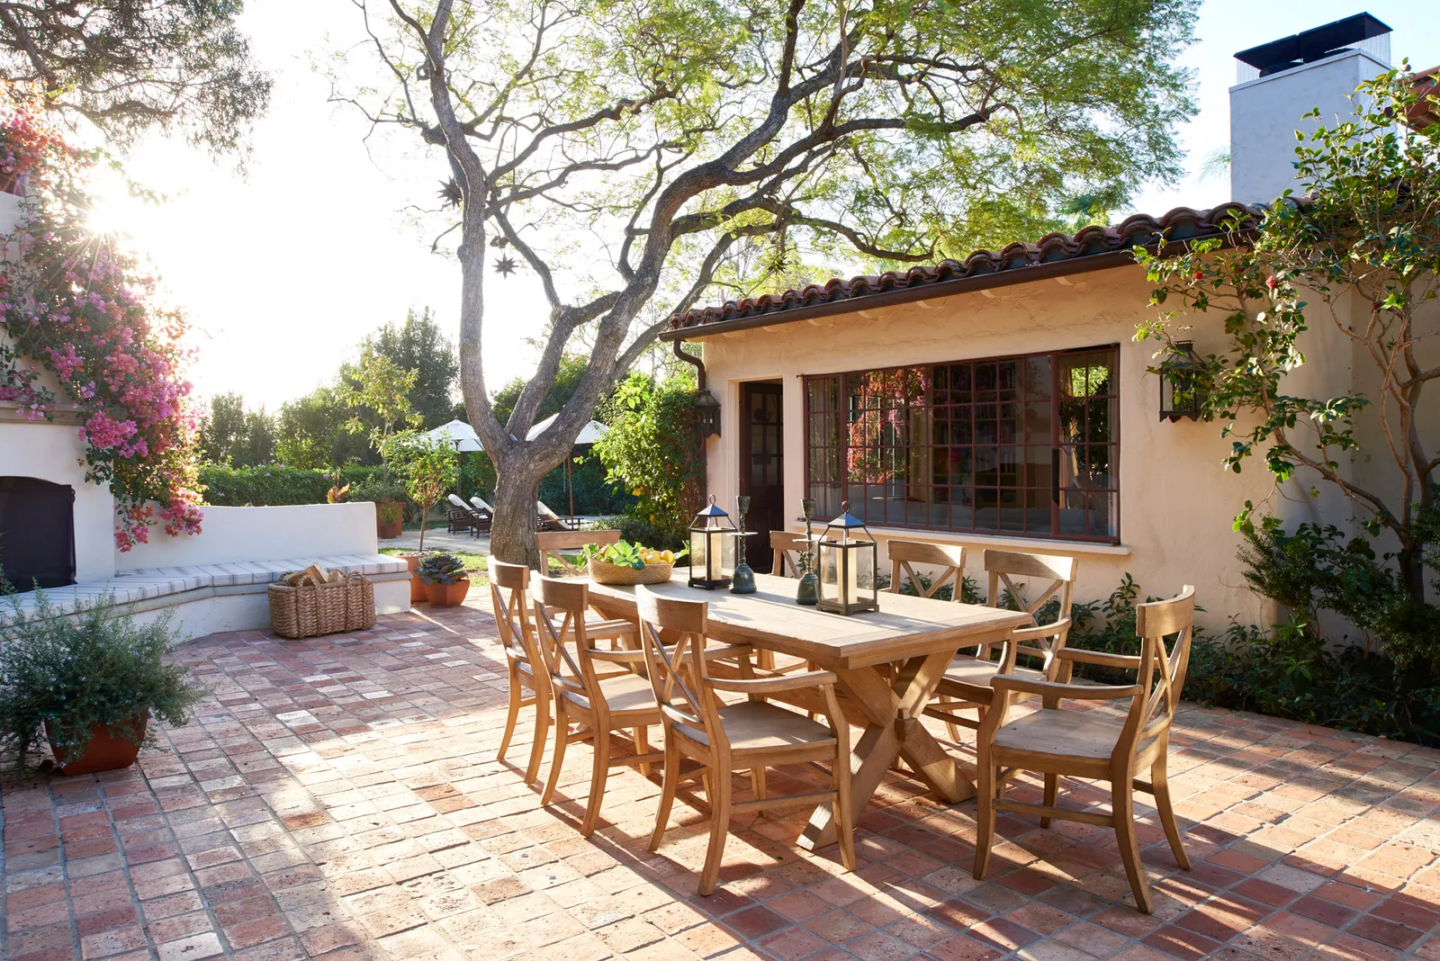 Reese Witherspoon's House in Home Again Movie. Exterior of back of a California Spanish hacienda house featured in HOME AGAIN starring Reese Witherspoon. #spanishhouseexterior #hacienda #homeagain #reesewitherspoon